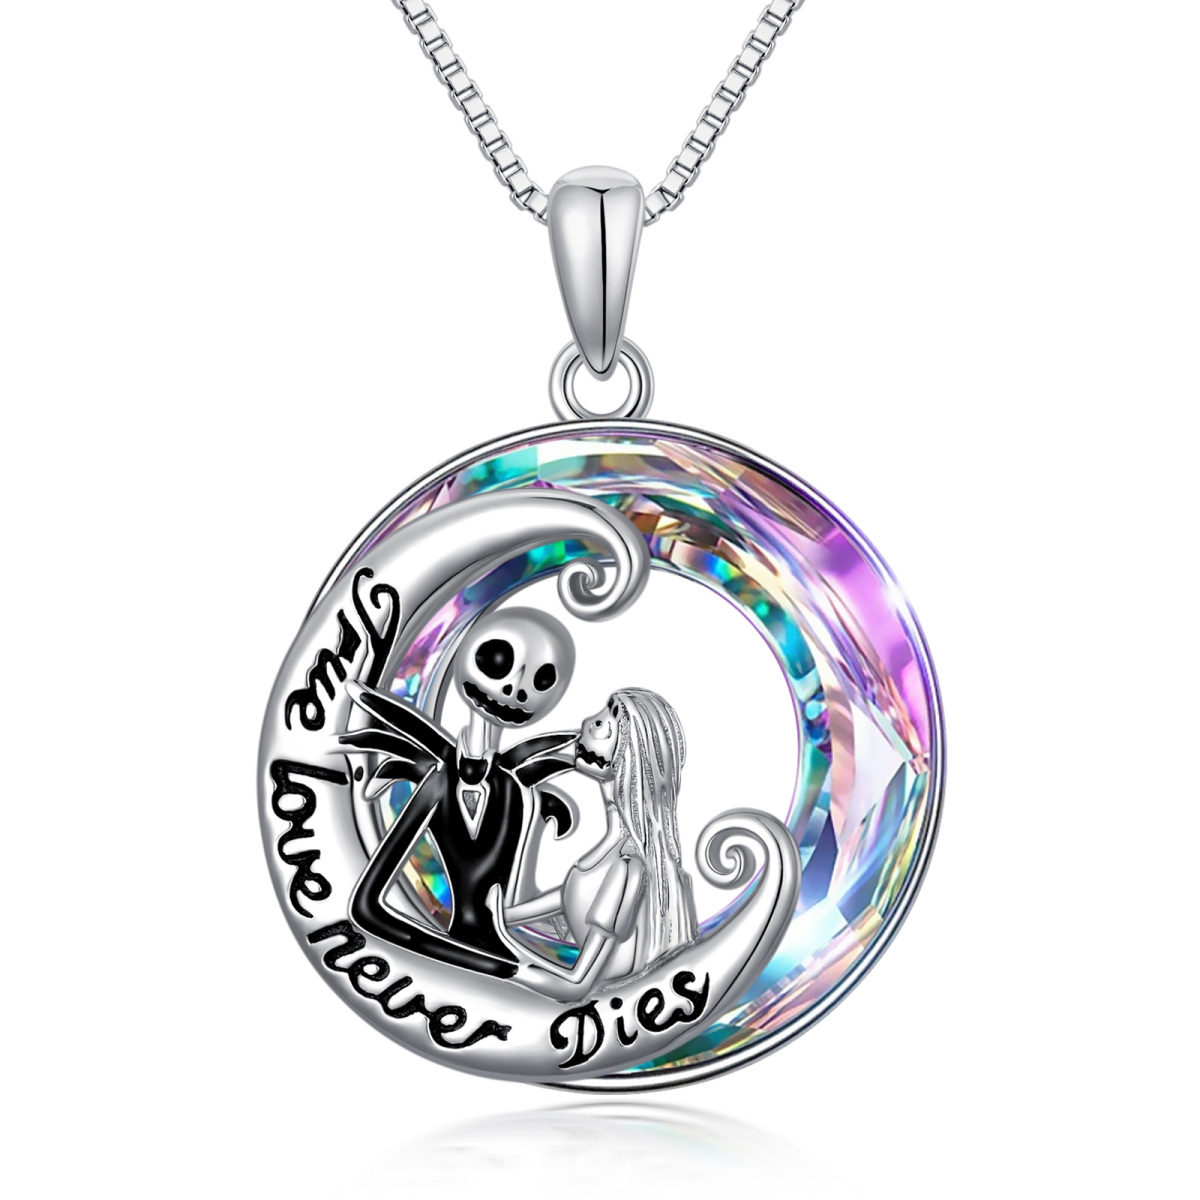 Sterling Silver Circular Shaped Moon & Skeleton Crystal Pendant Necklace with Engraved Word-1